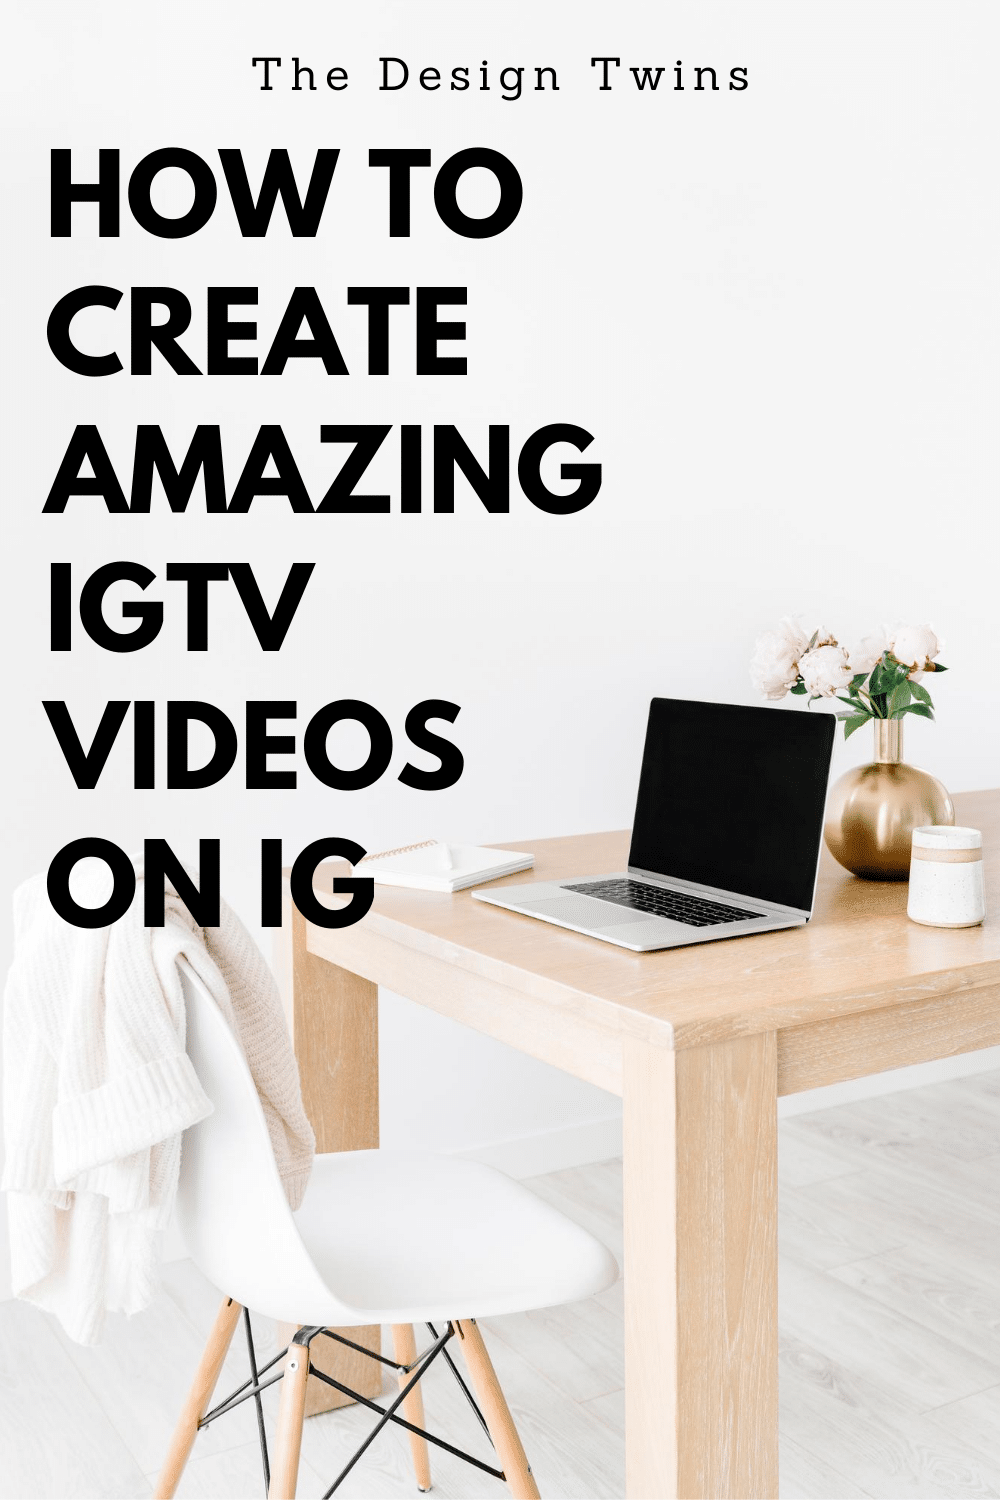 How to Create Amazing IGTV Videos on Instagram - The Design Twins